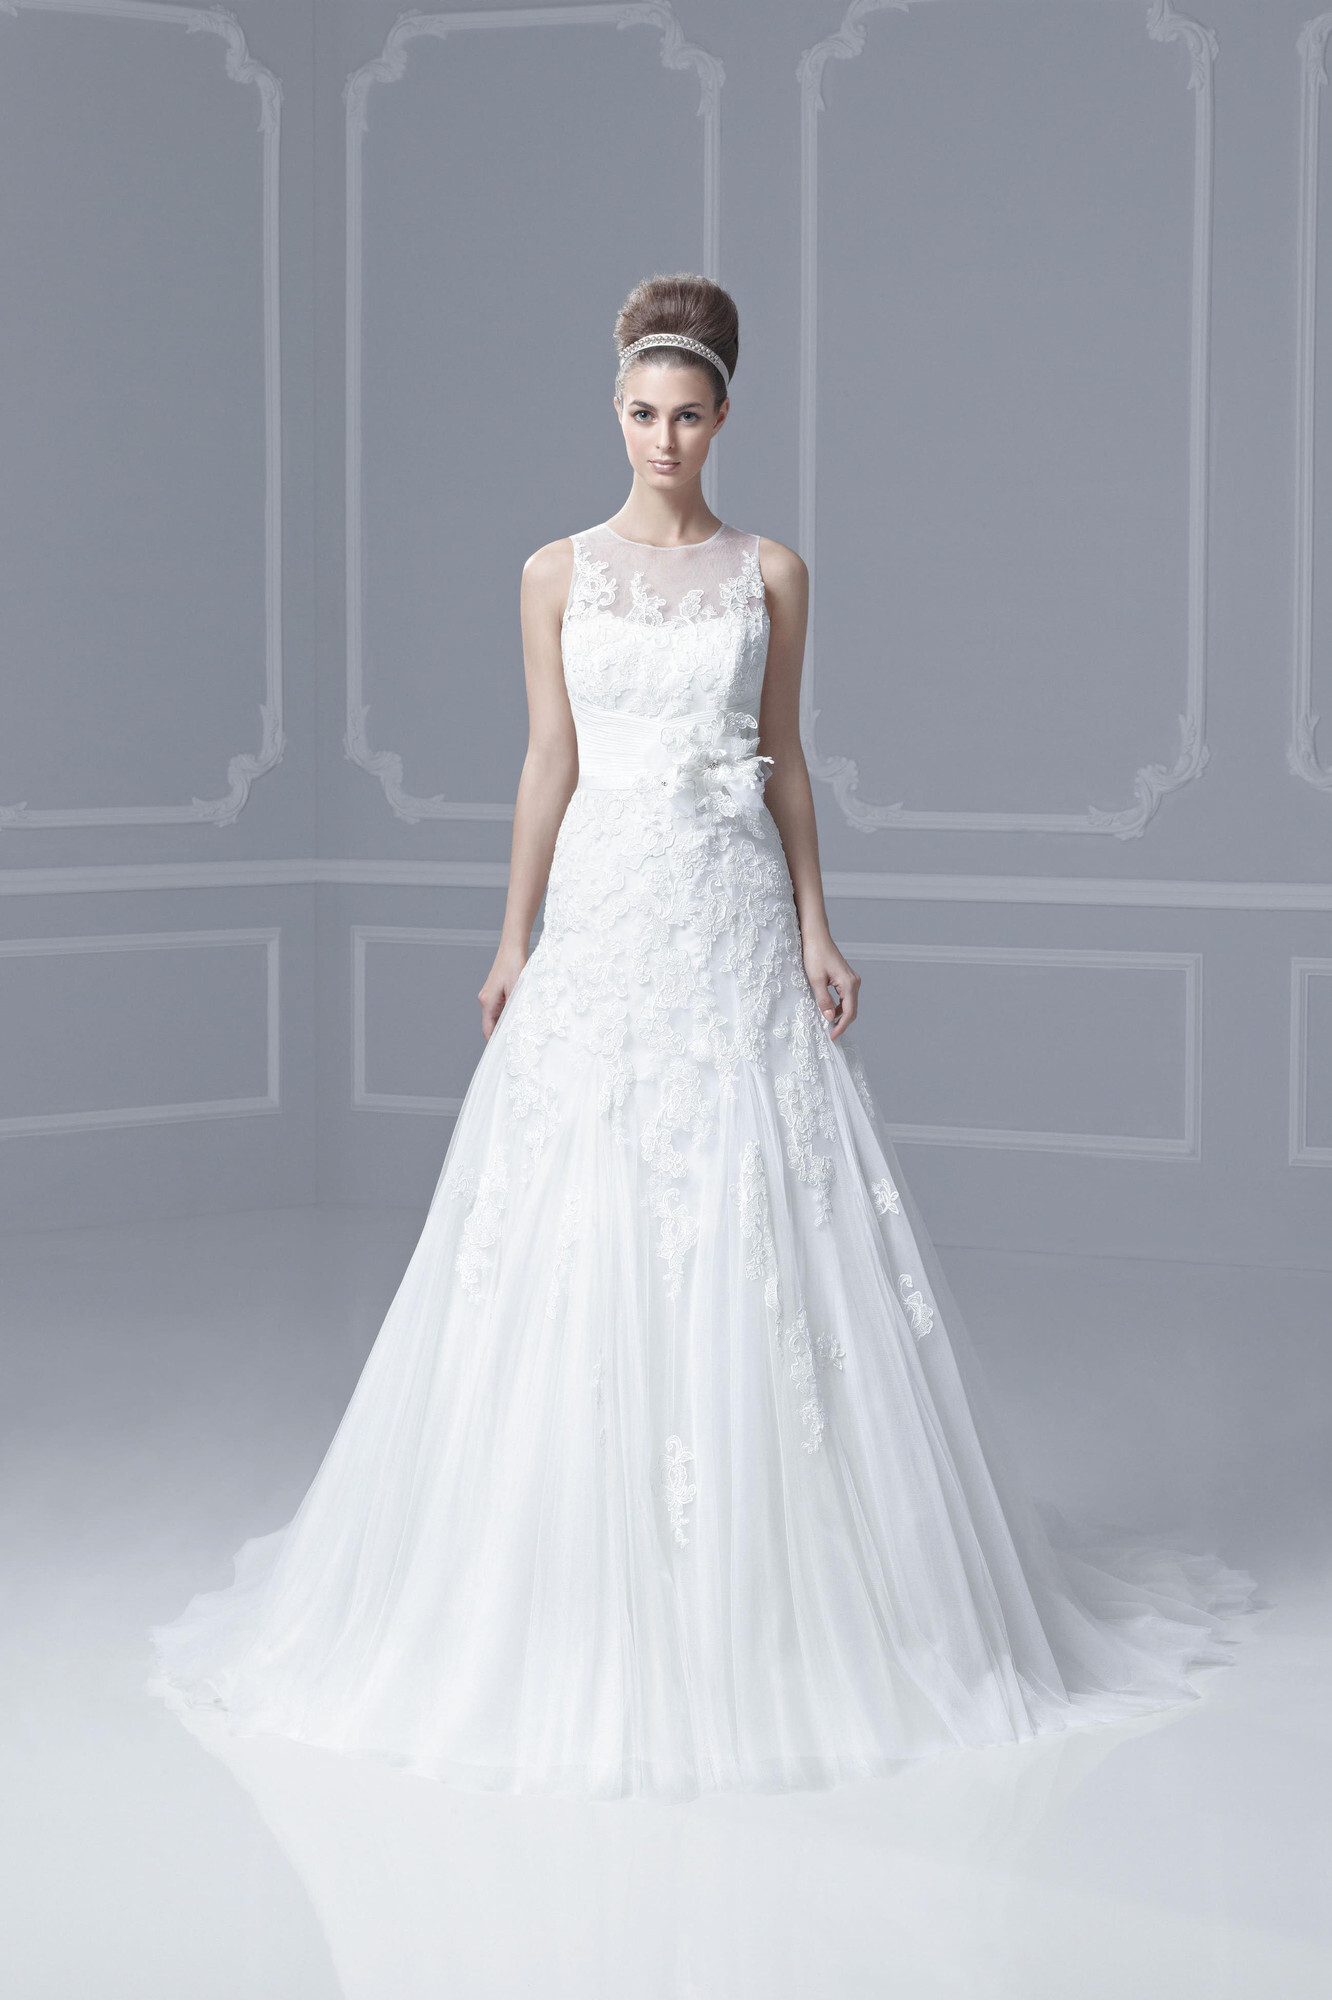 Fargo Wedding Dress from Blue By Enzoani - hitched.co.uk